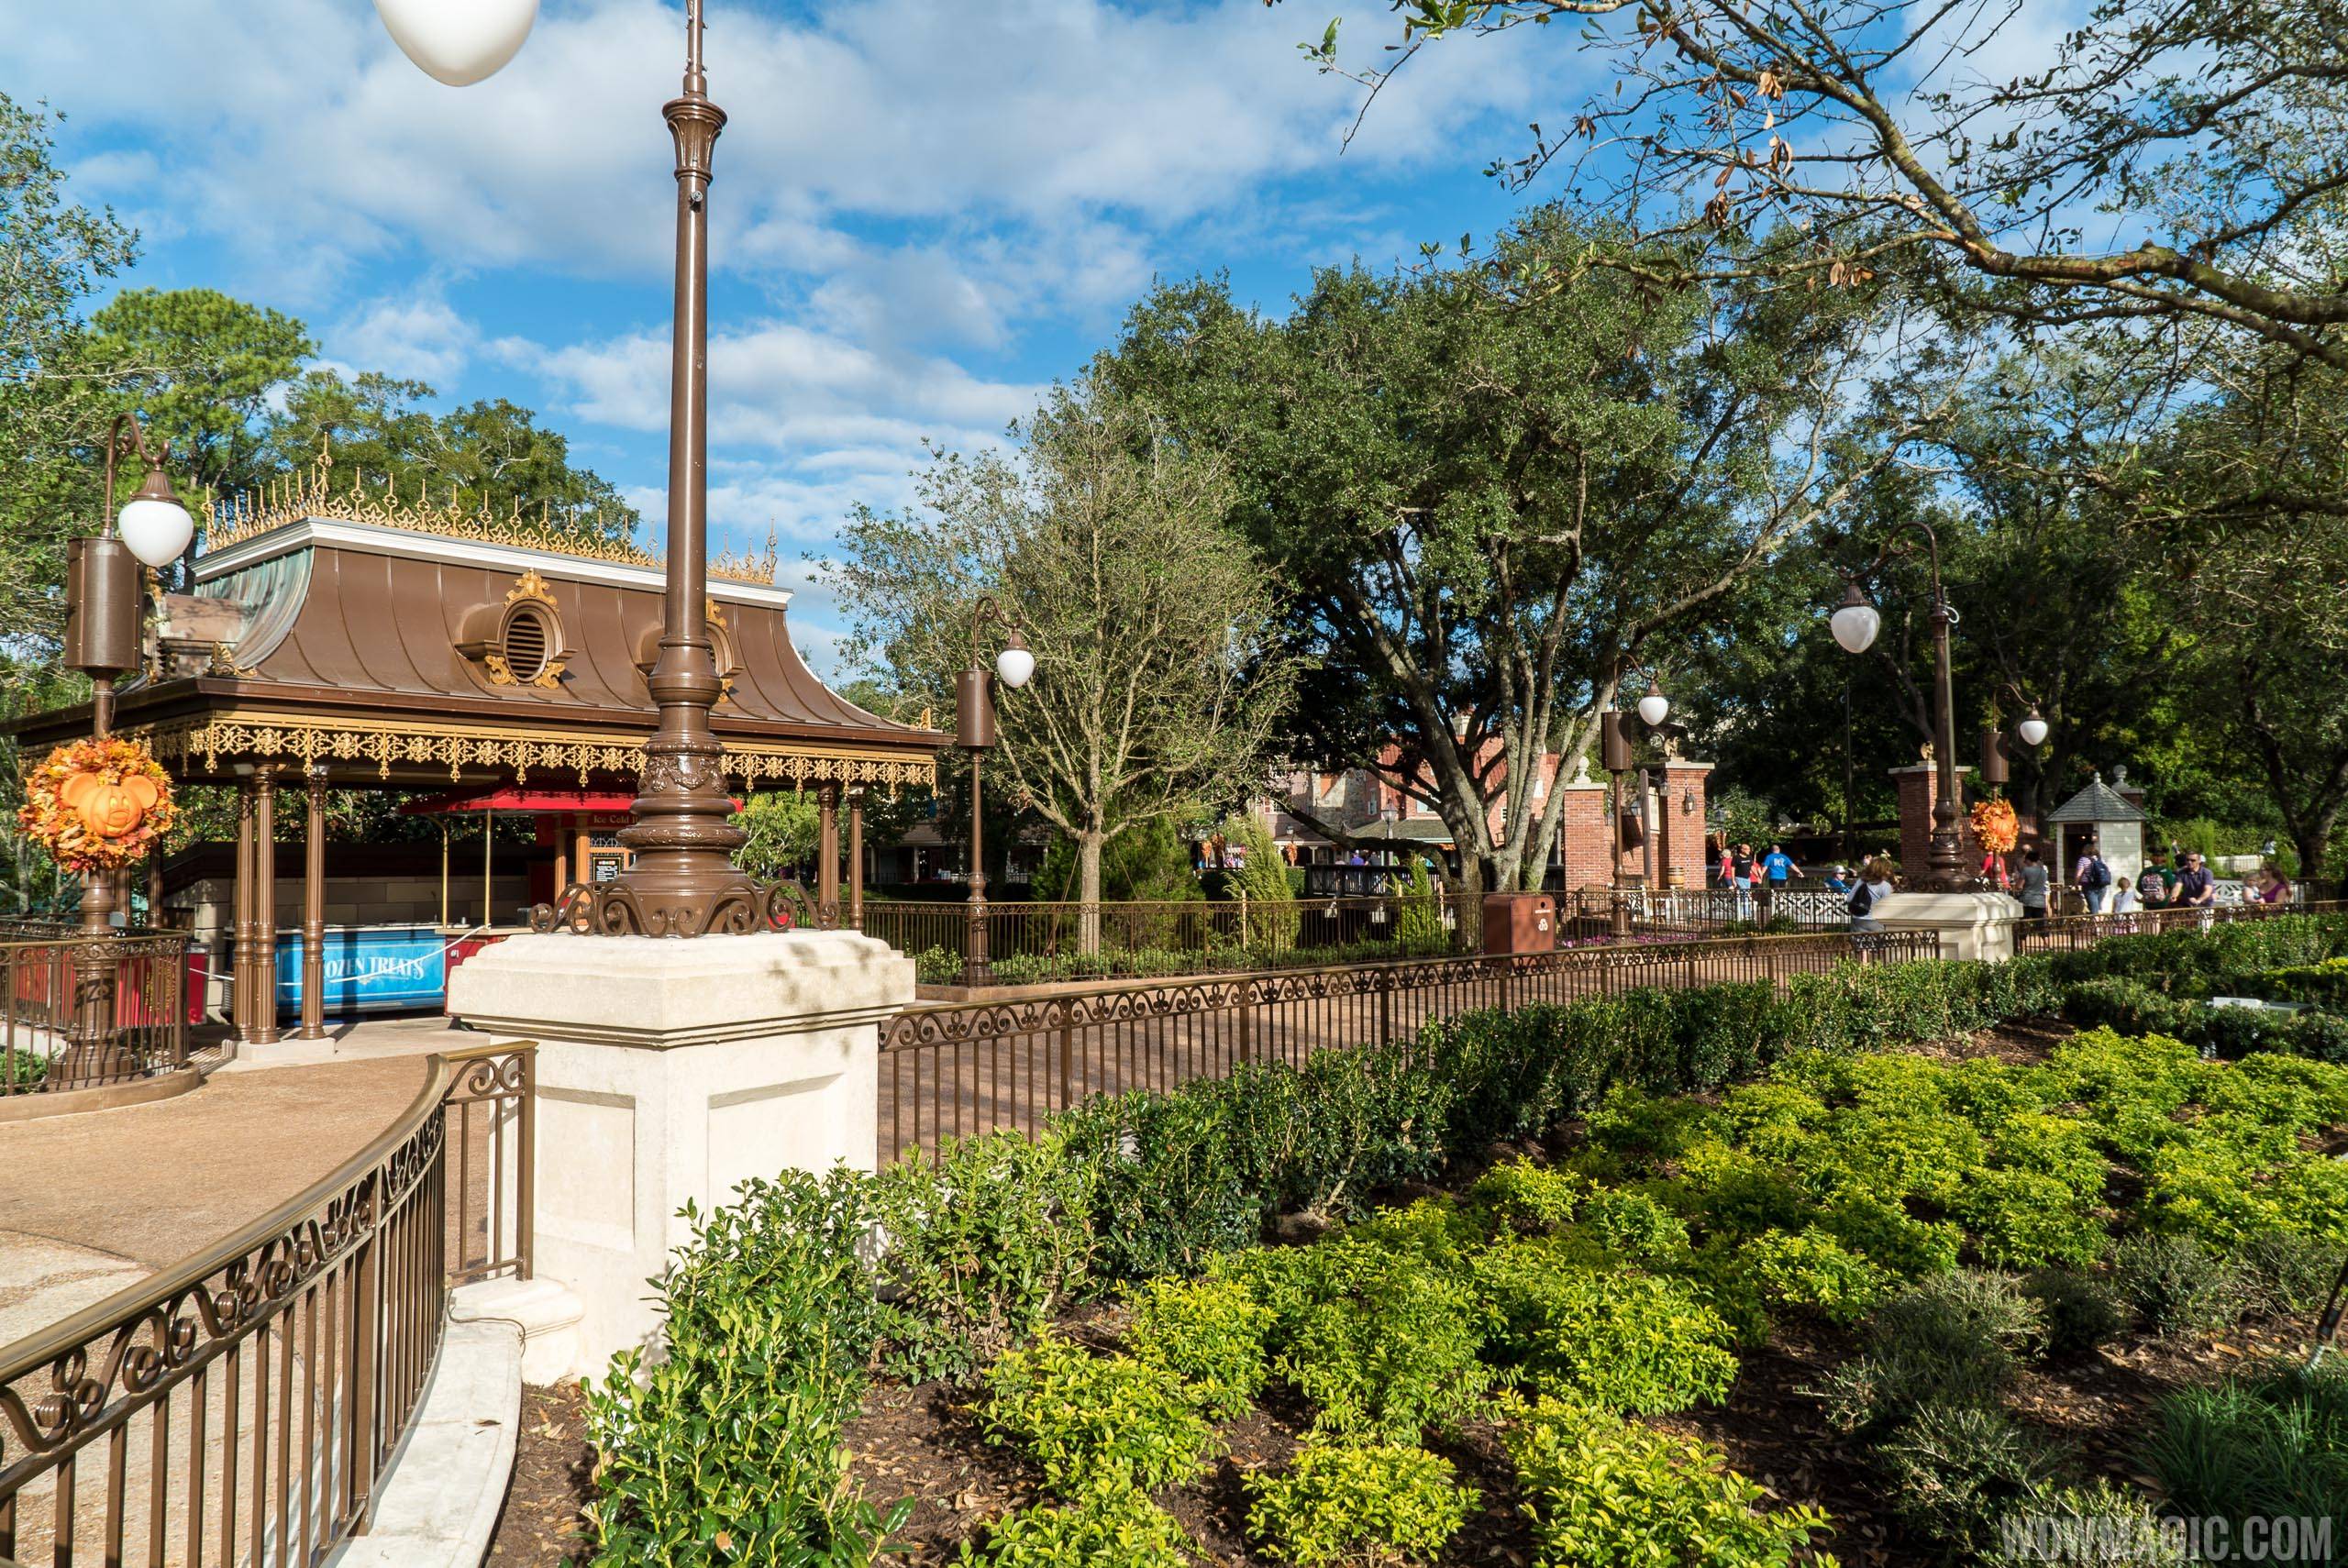 PHOTOS - Final section of the new Magic Kingdom hub area opens to guests